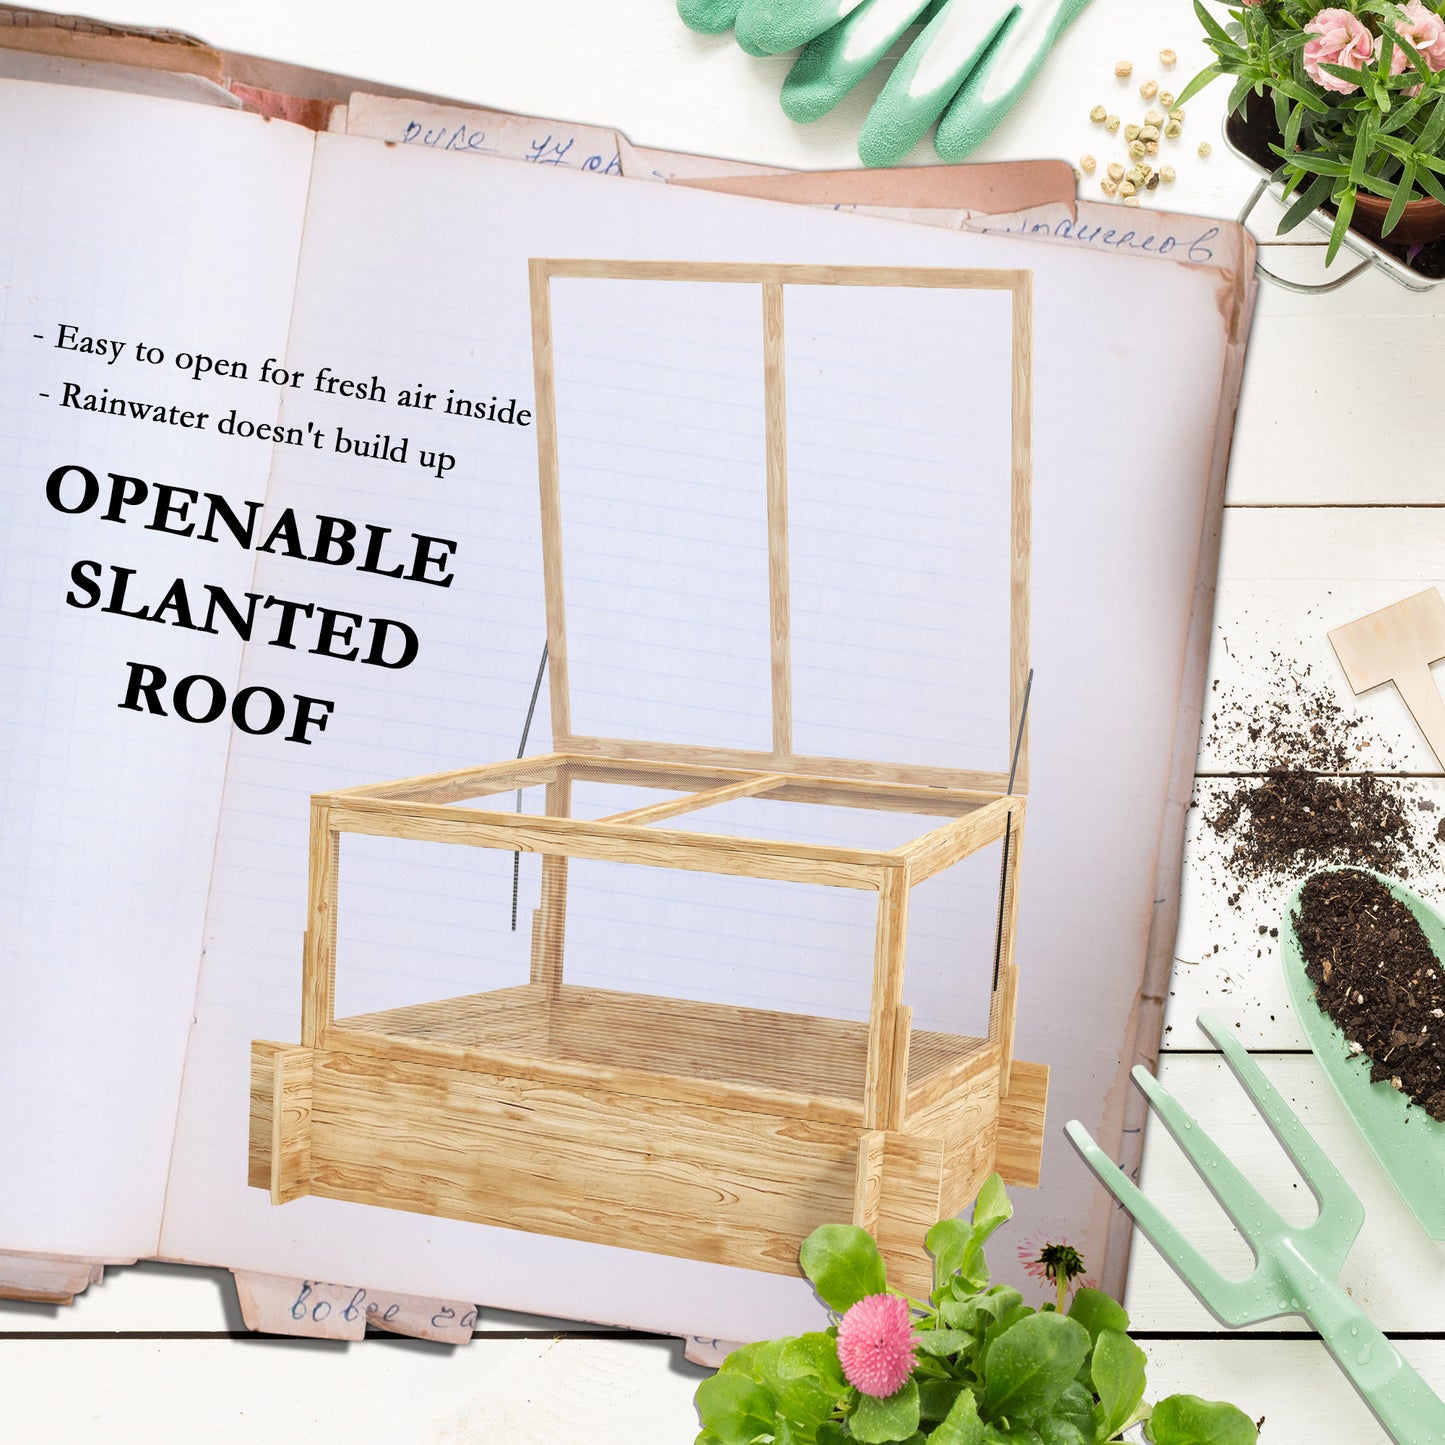 Outsunny Elevated Planter with Greenhouse: Wooden Box with Openable Top for Veggies, Flowers, and Herbs